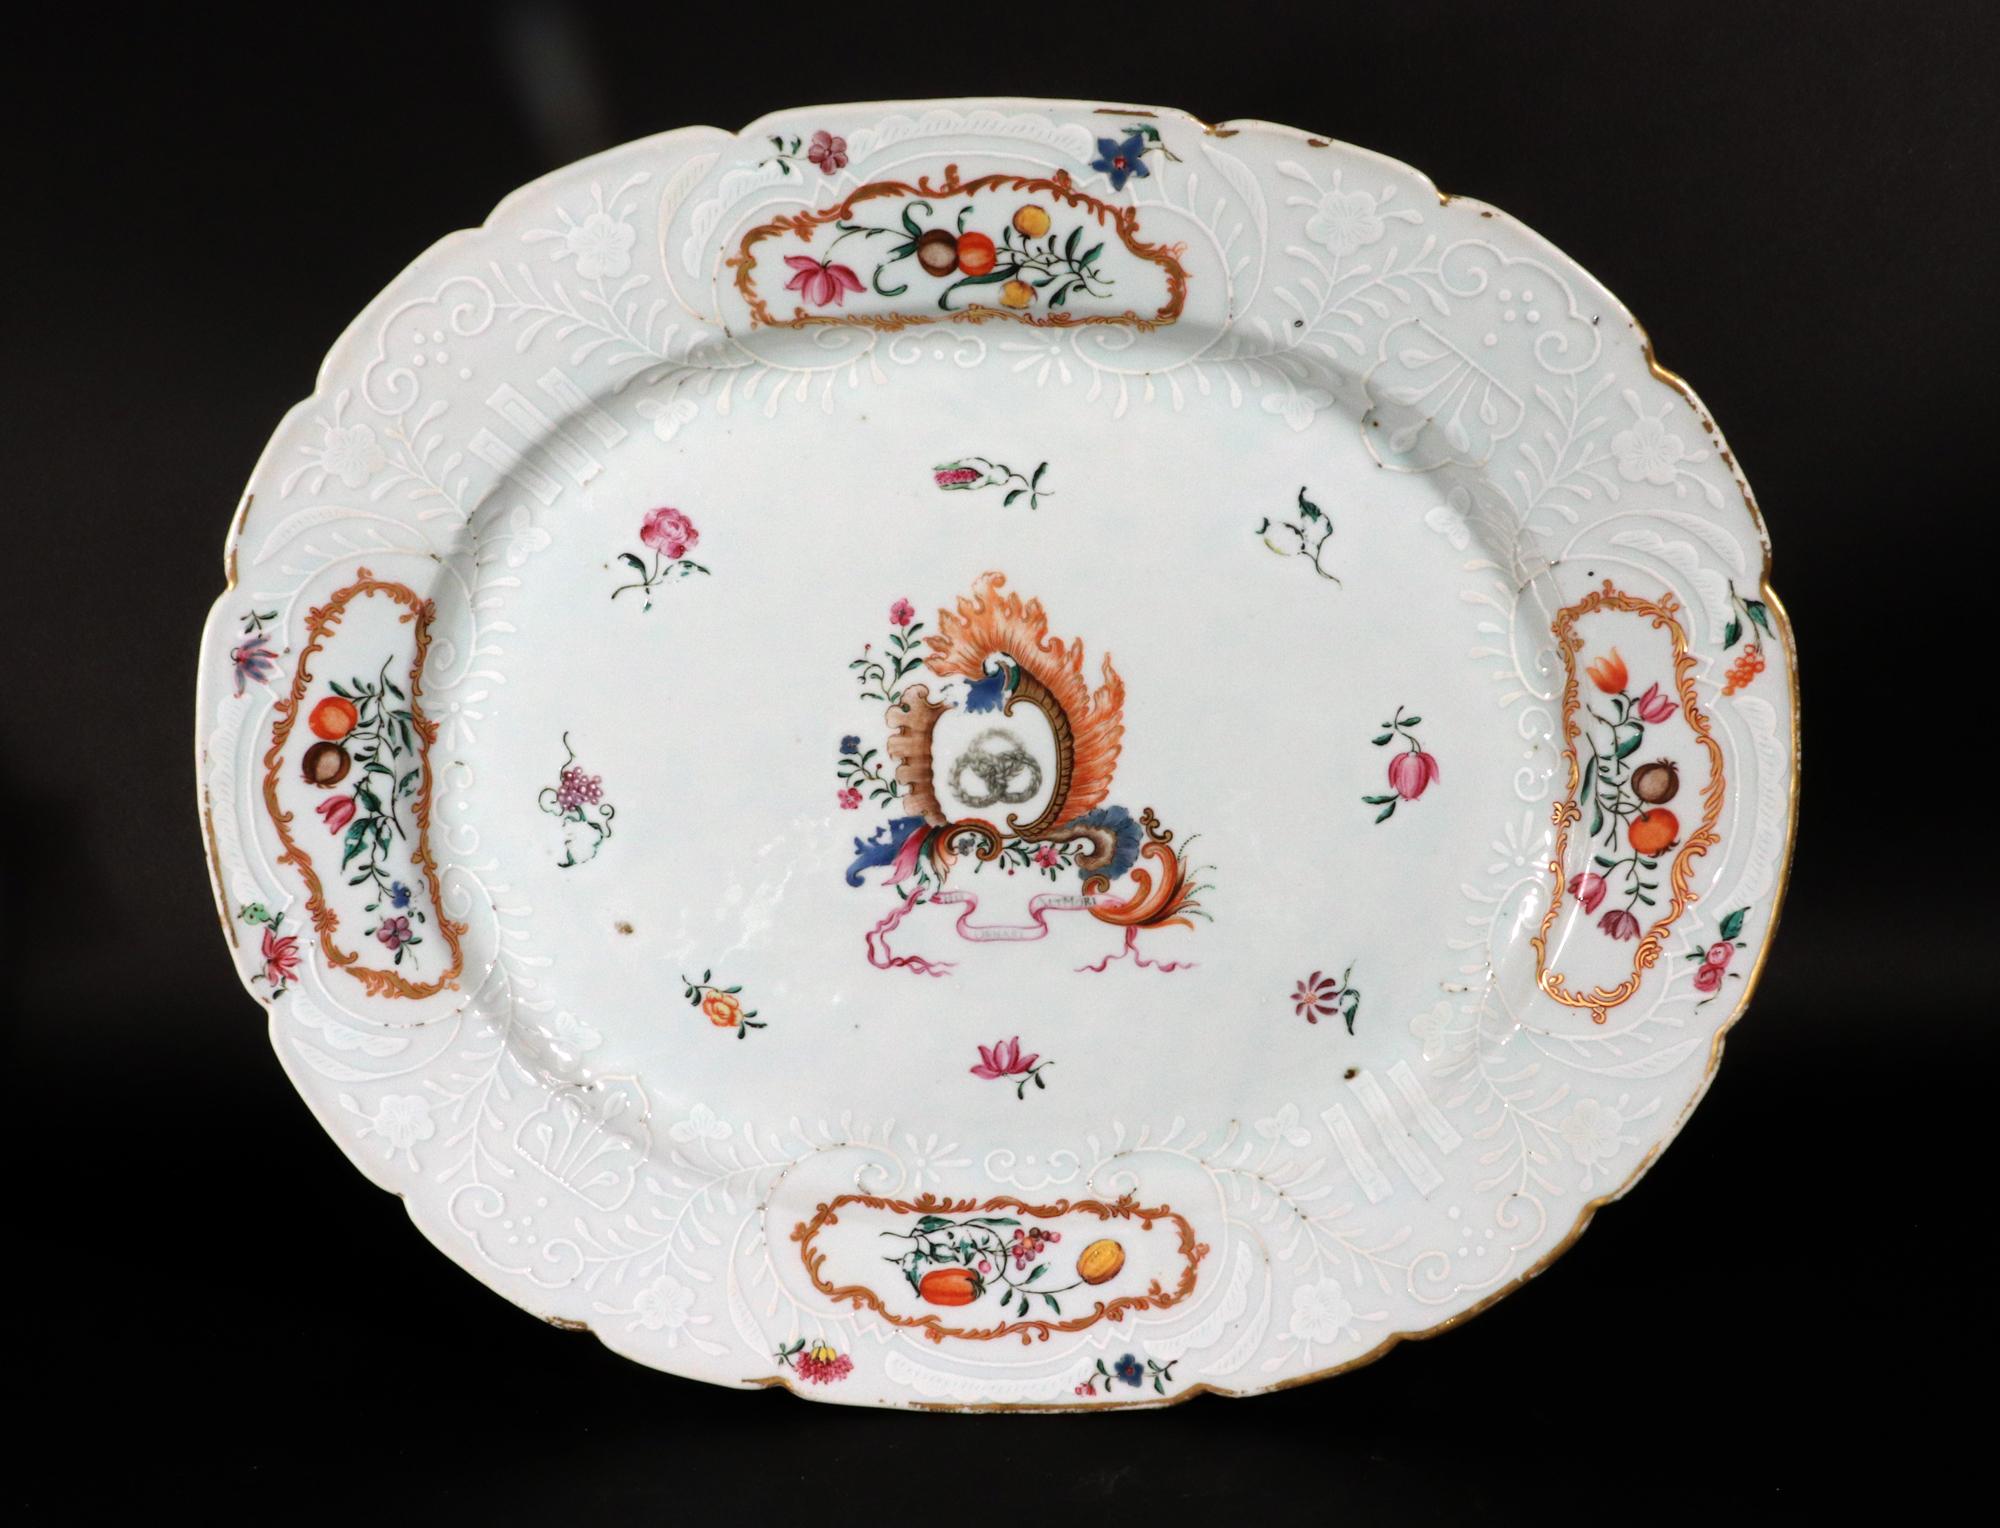 Chinese Export Porcelain Armorial Dish,
Pseudo Continental Arms,
Motto- 